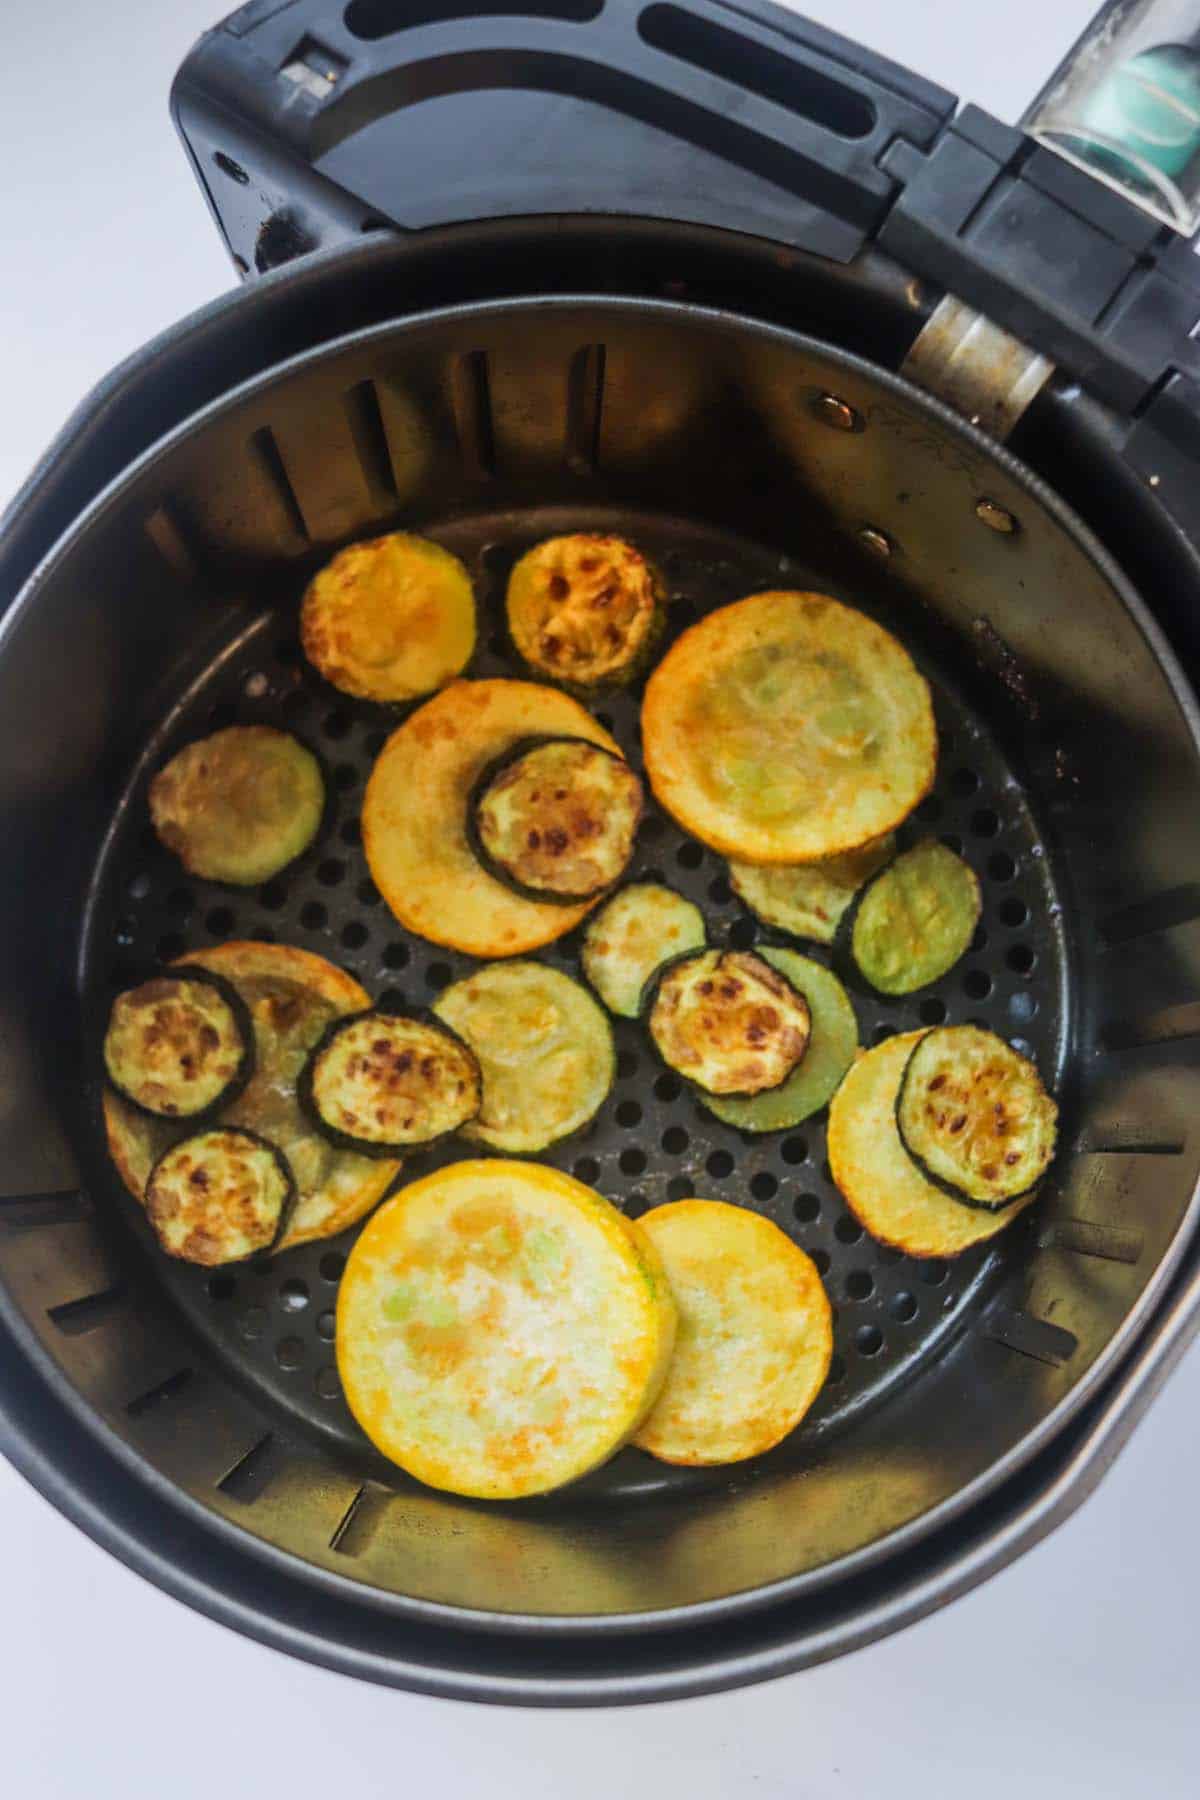 Cooked slices of squash in the air fryer basket.